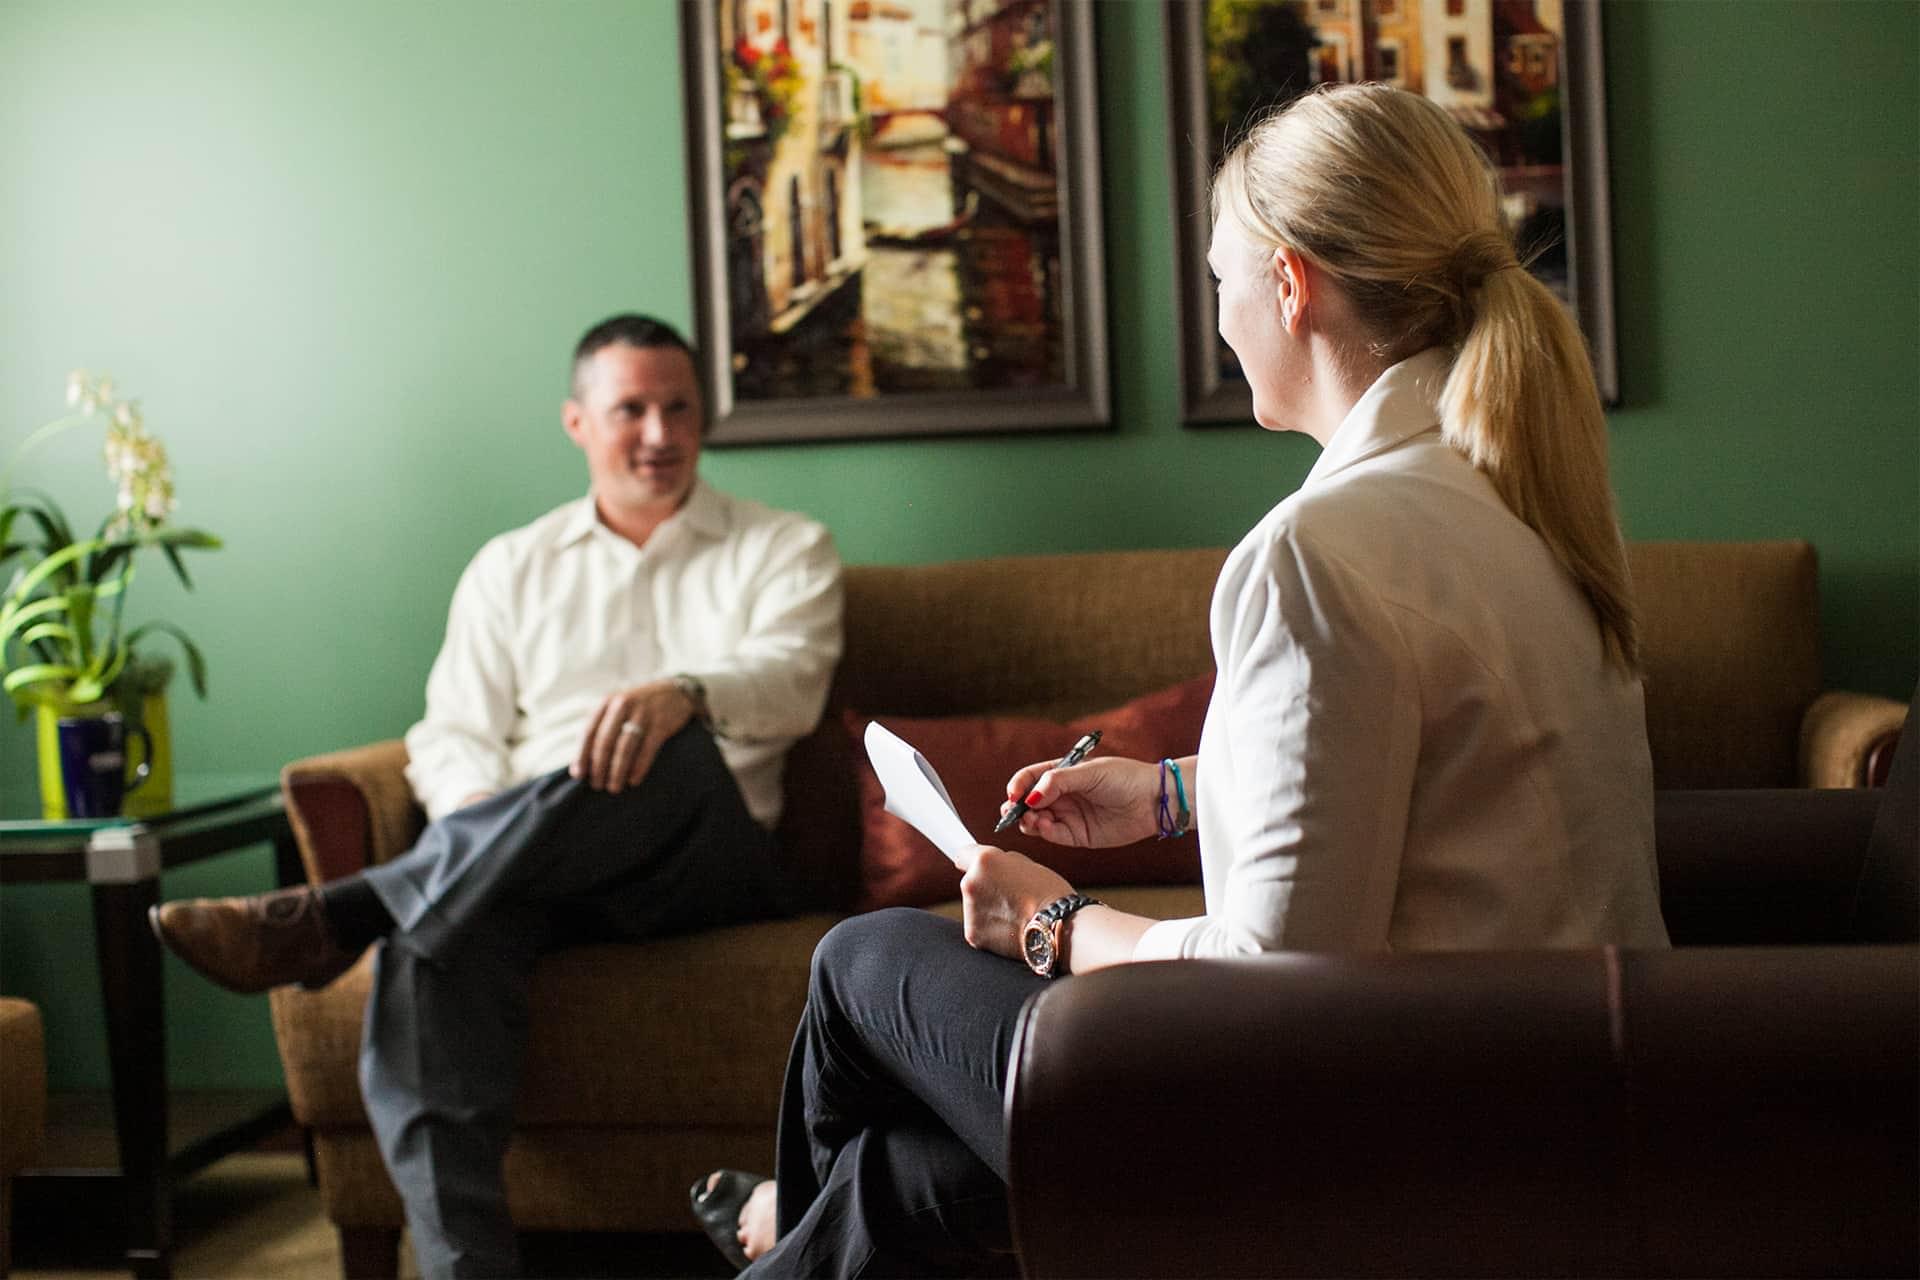 Gentleman meeting with a PRO Medical Counselor to discuss psychiatric care